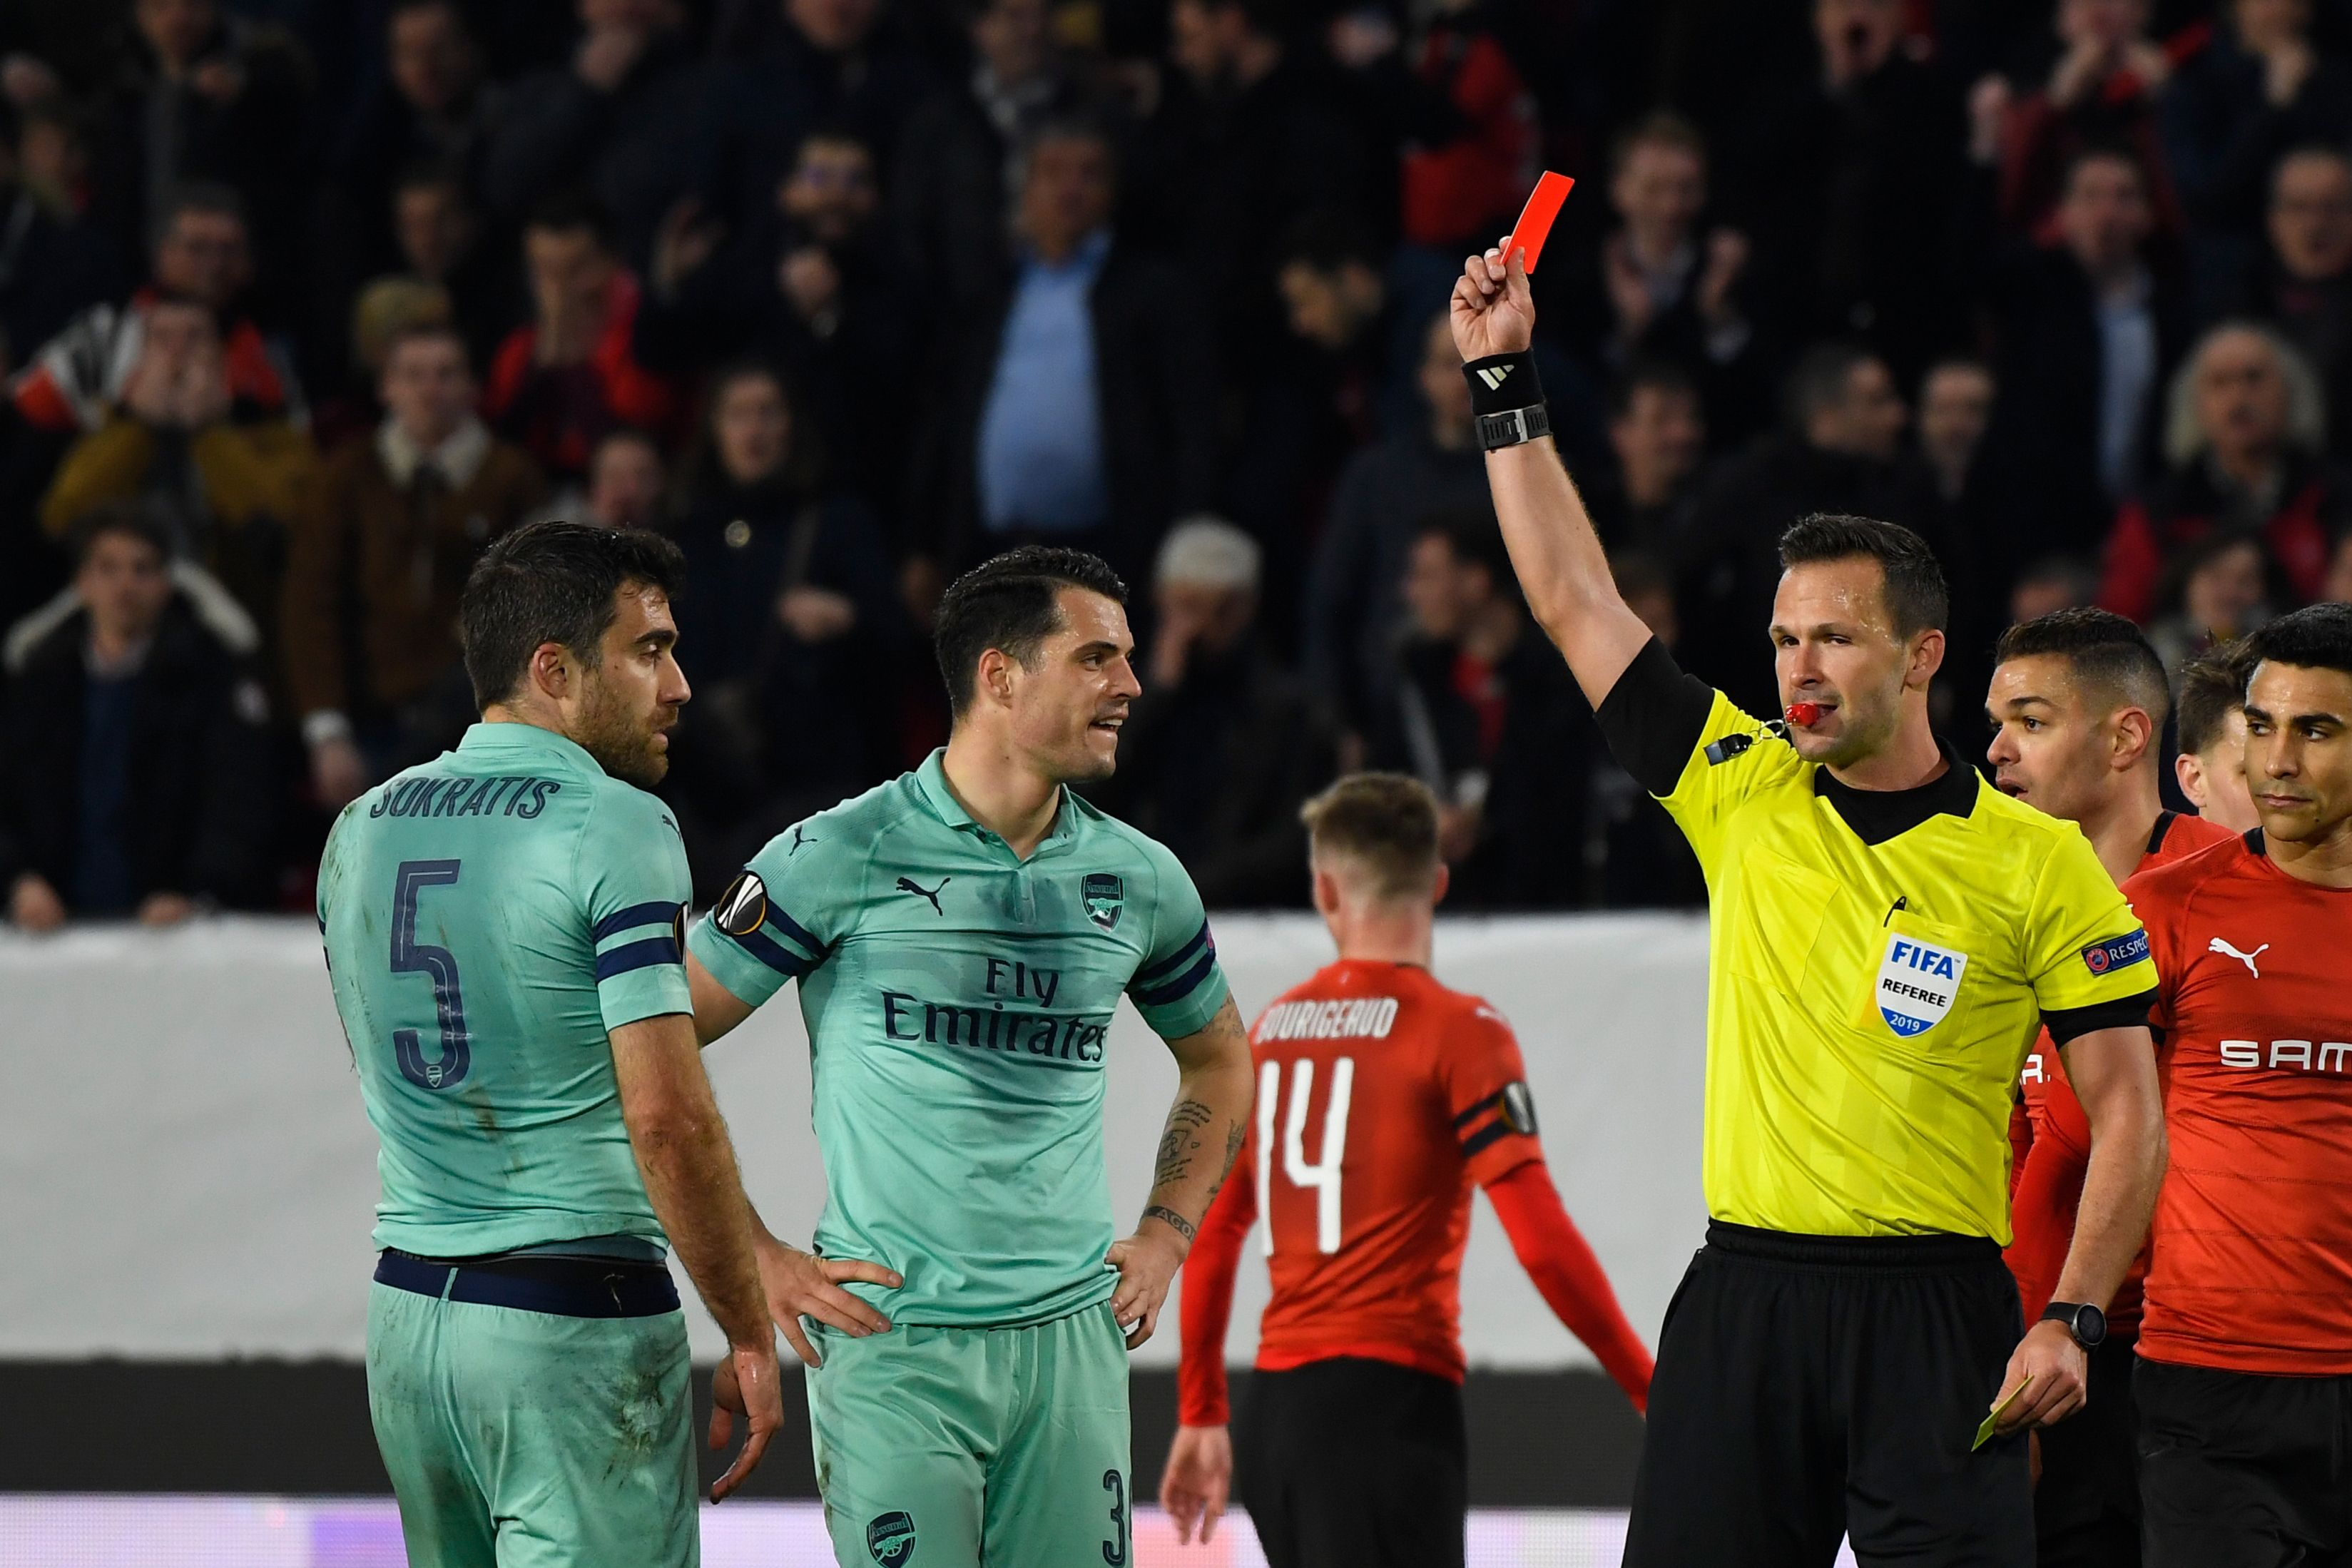 Slovak referee Ivan Kruzliak (R) shows a red card to Arsenal's Greek defender Sokratis Papastathopoulos (L) during the UEFA Europa League round of 16 first leg football match between Stade Rennais FC and Arsenal FC at the Roazhon Park stadium in Rennes, northwestern France on March 7, 2019. (Photo by DAMIEN MEYER / AFP)        (Photo credit should read DAMIEN MEYER/AFP/Getty Images)